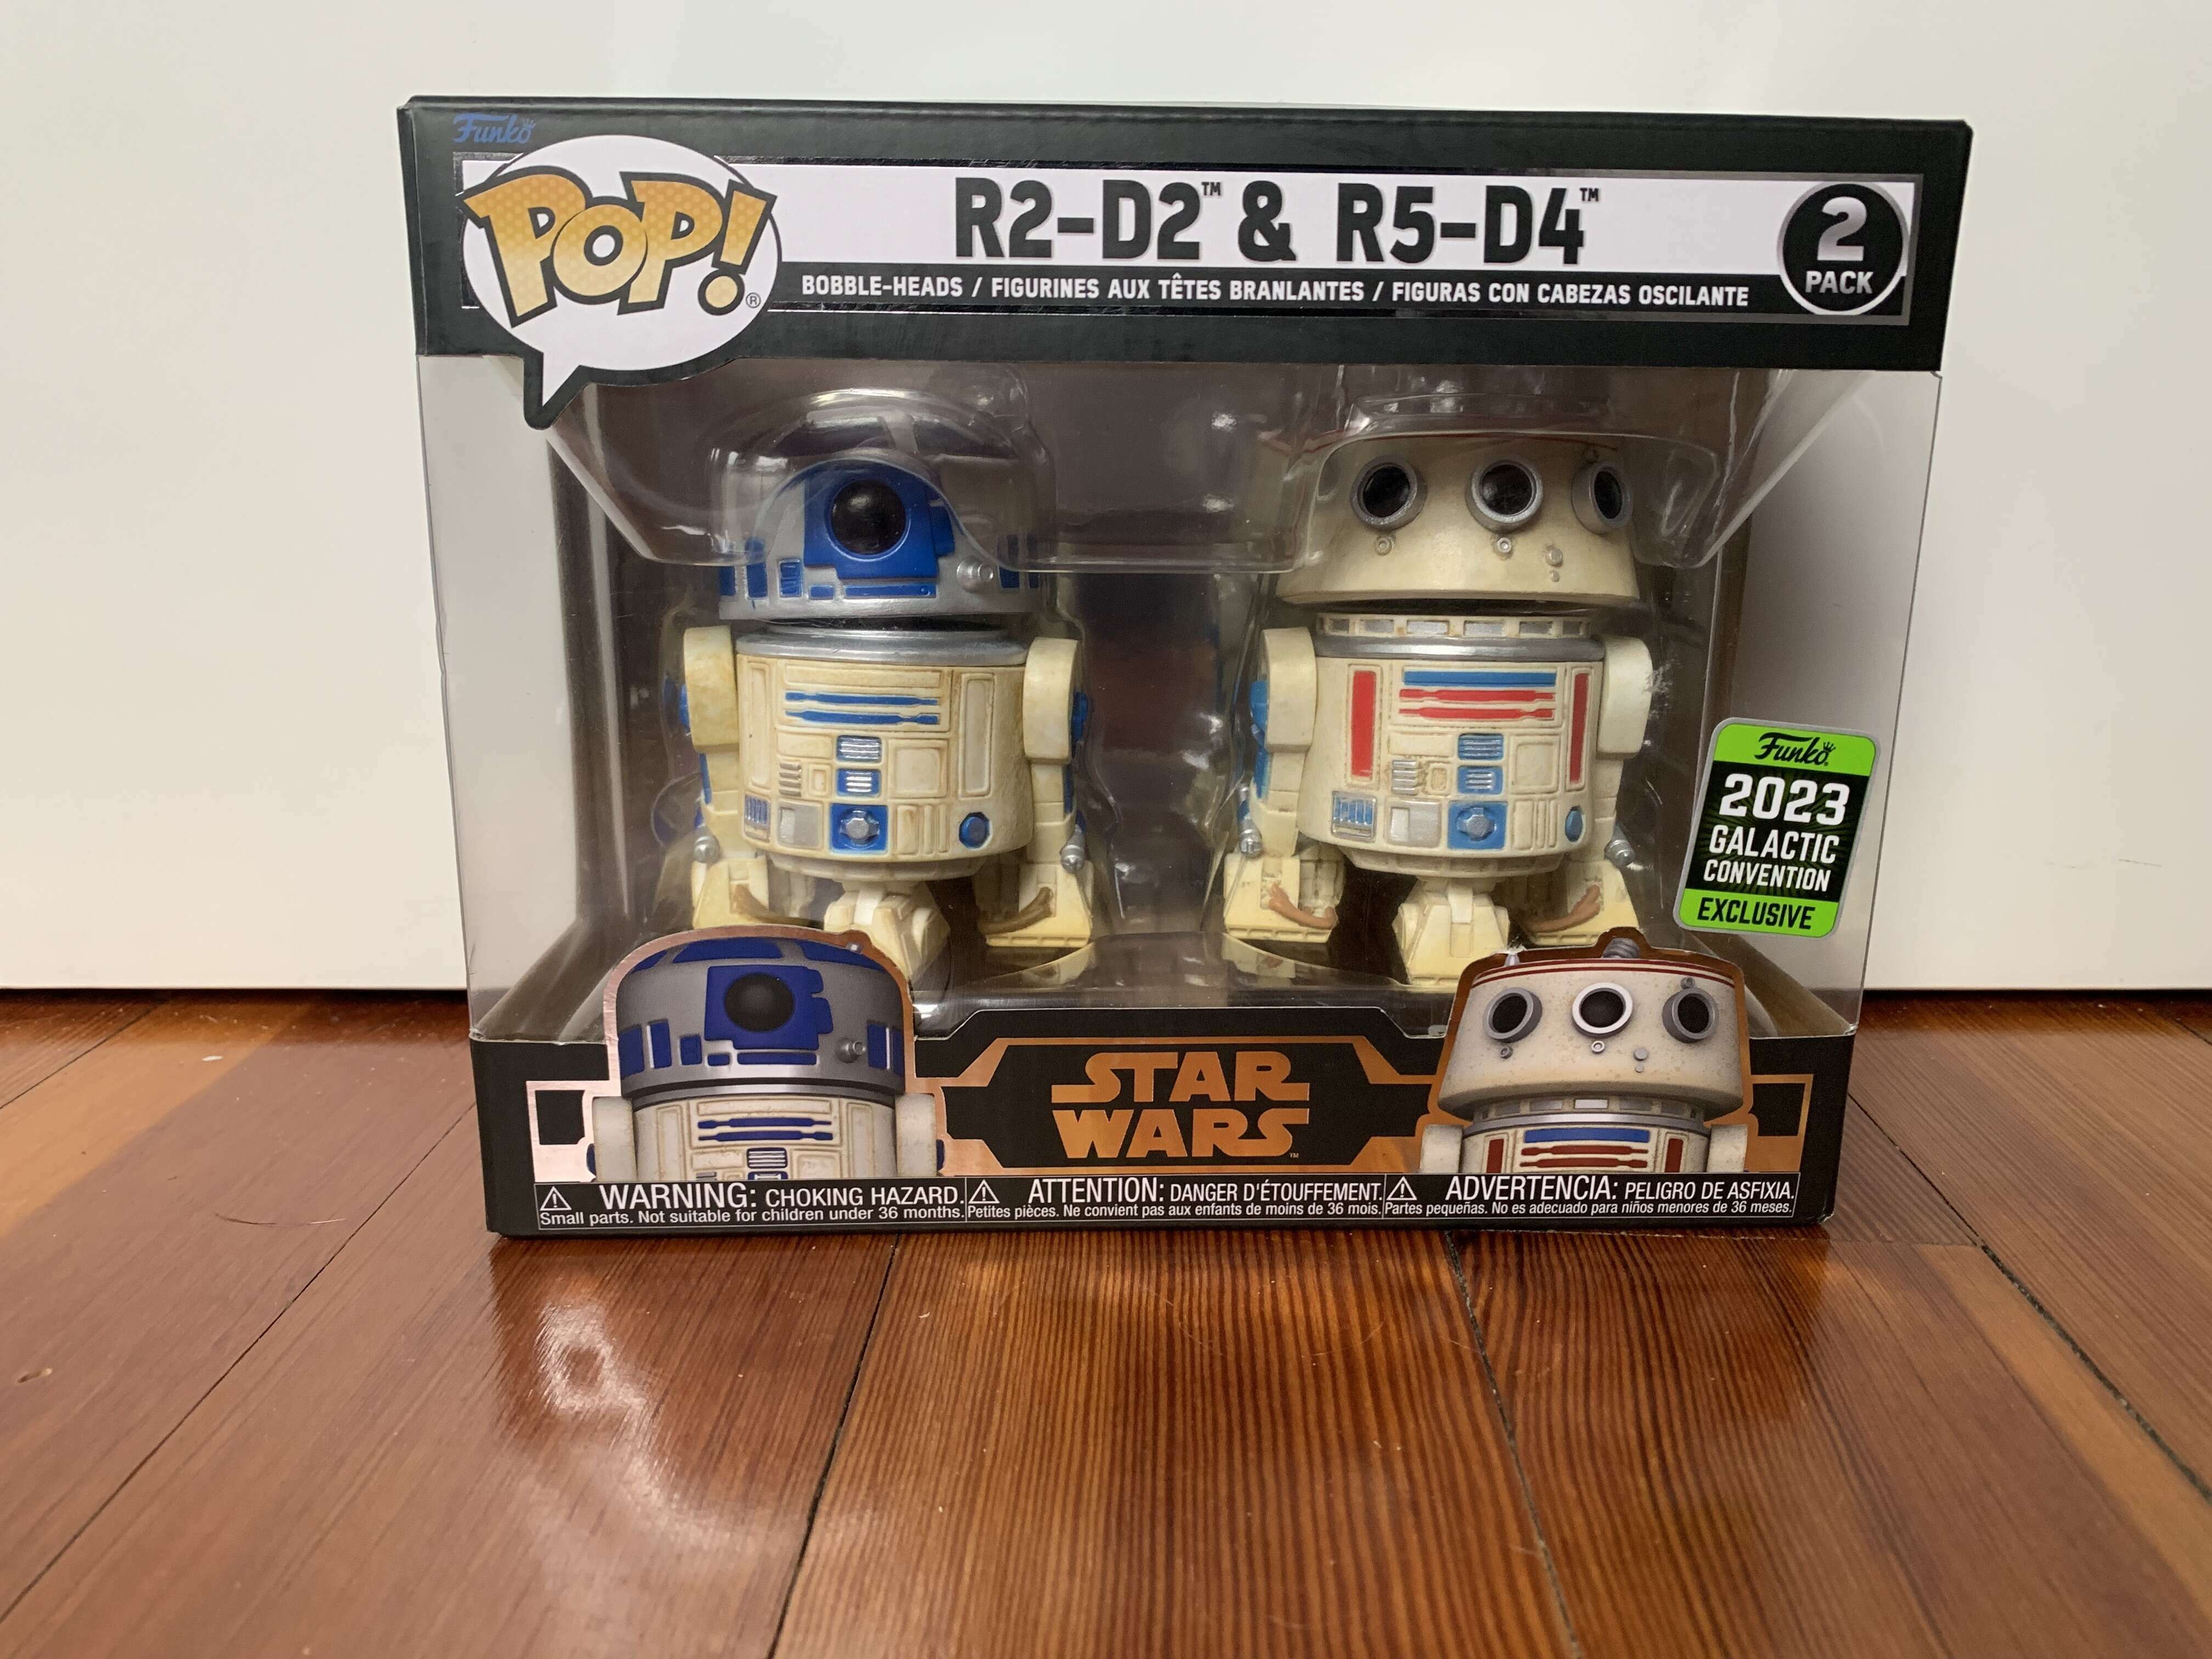 Funko POP! Star Wars Celebration 2023 R2-D2 and R5-D4 Vinyl Bobblehead Set  2-Pack 2023 Galactic Convention Exclusive